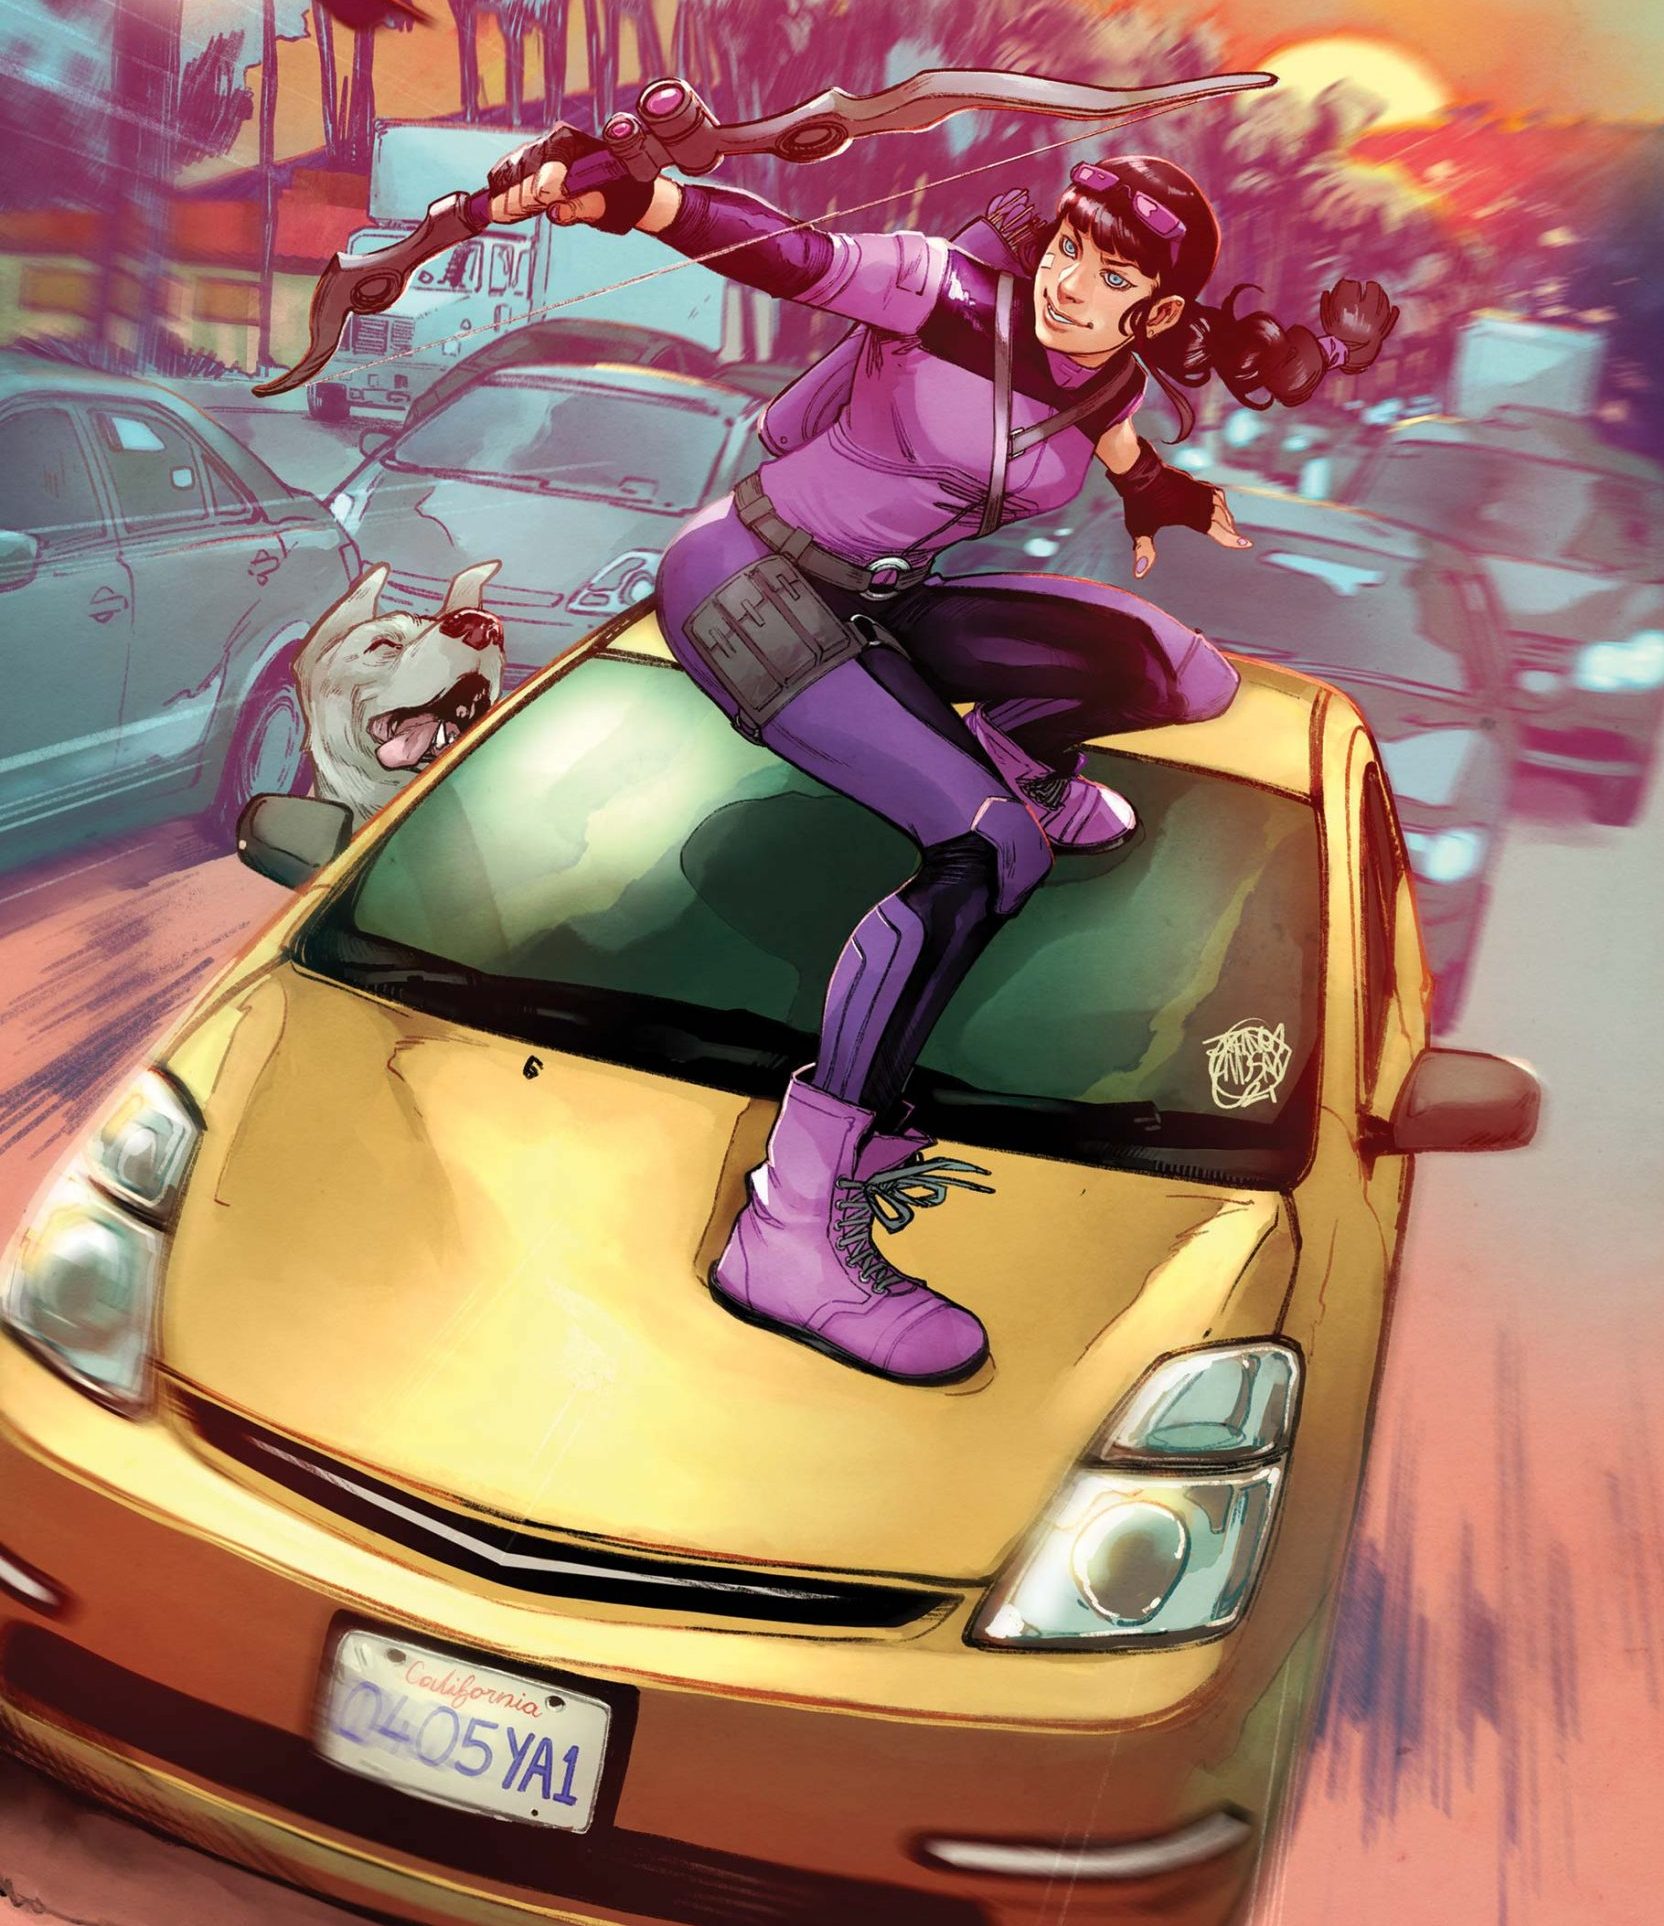 'Hawkeye: Kate Bishop' #1 is full of mystery and sass